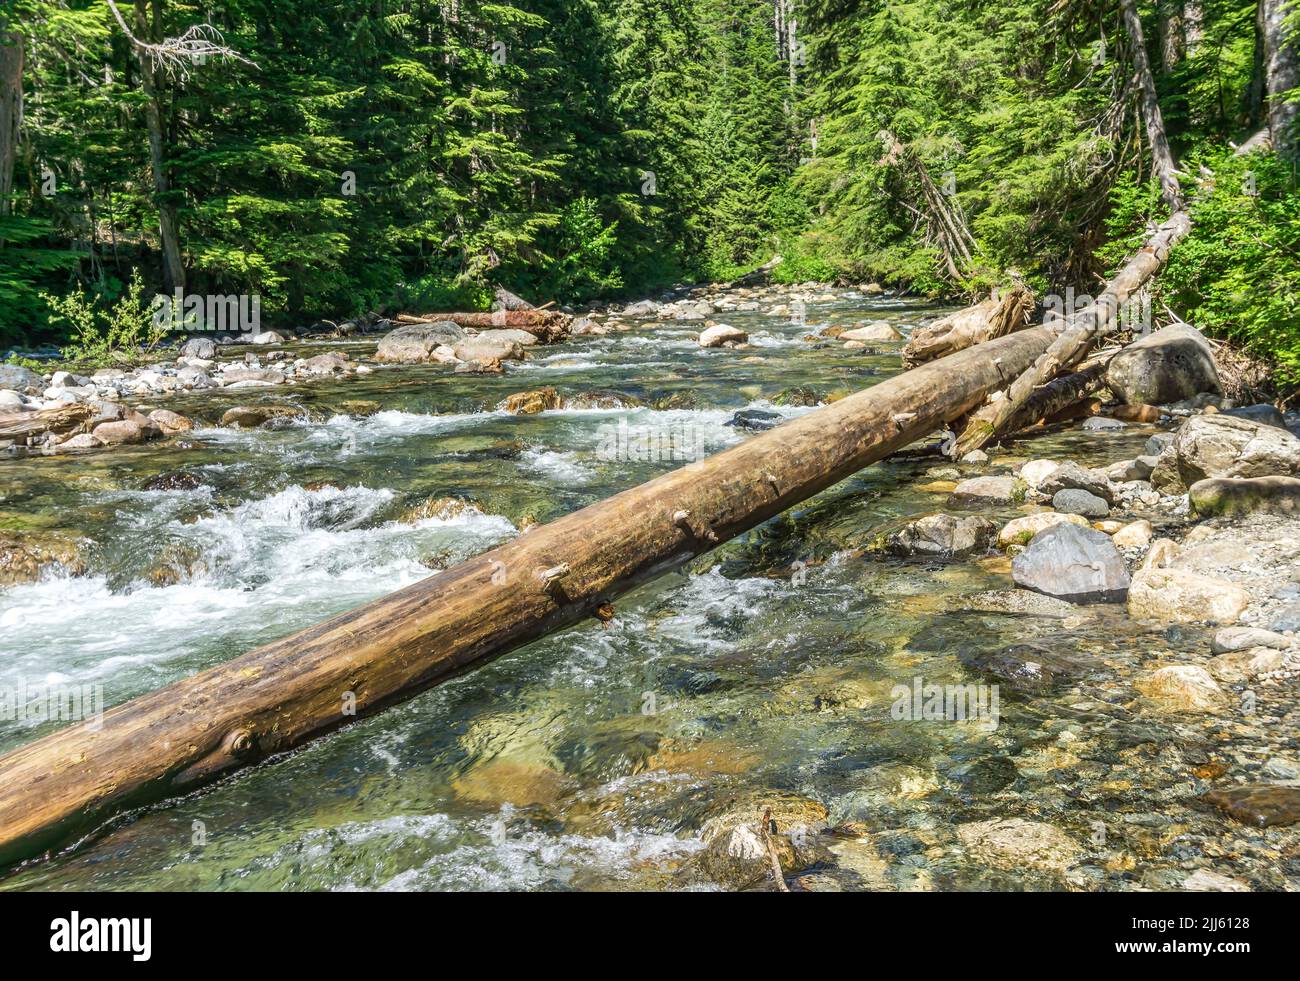 Rapids create whitewater at Denny Creek in Washington State. Stock Photo